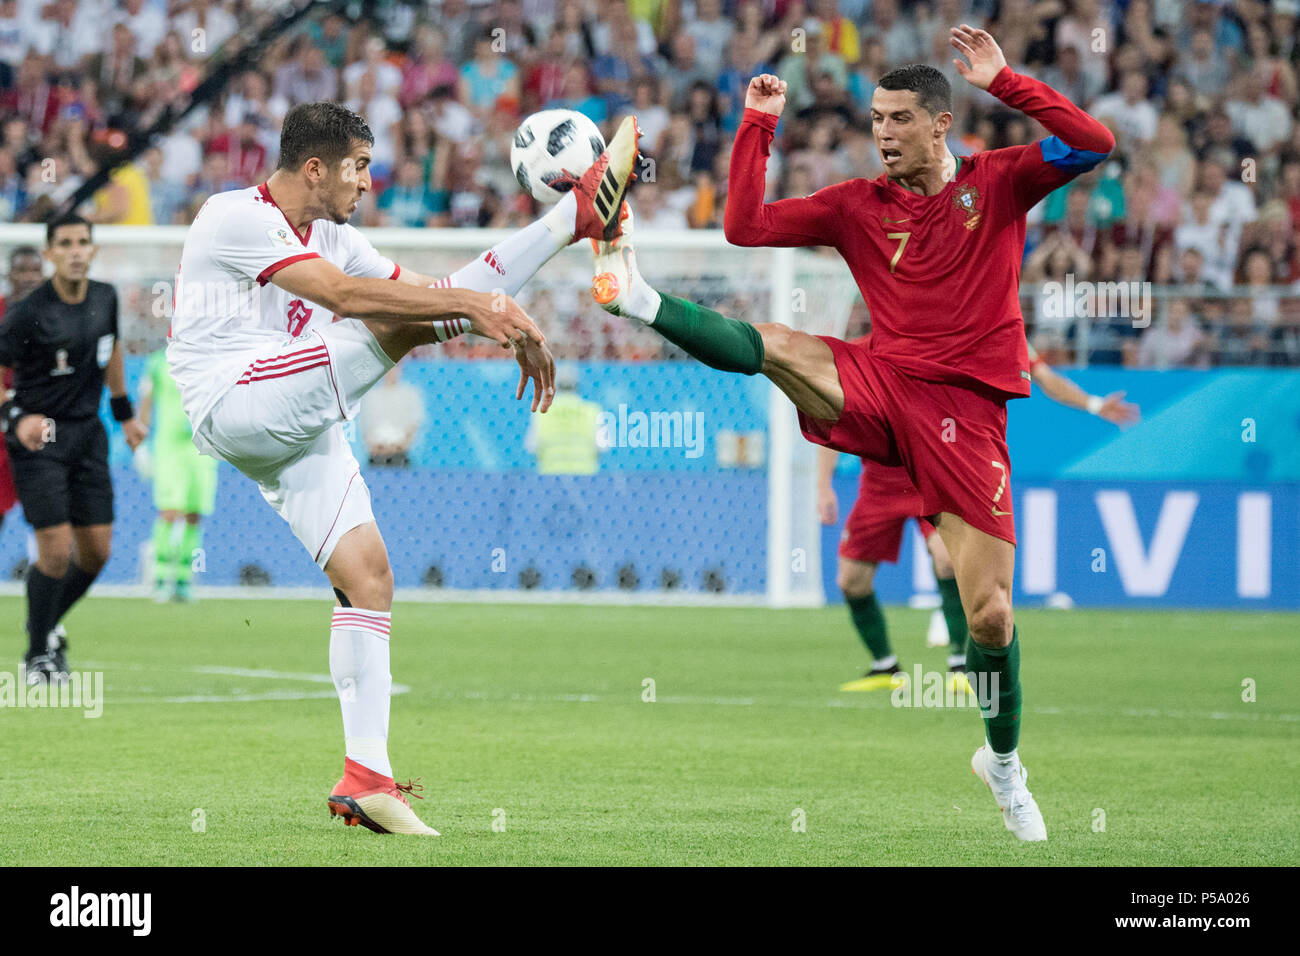 Majid HOSSEINI (left, IRN) versus Cristiano RONALDO (POR), action, duels, Iran (IRN) - Portugal (POR) 1: 1, preliminary round, group B, match 35, on 25.06.2018 in Saransk; Football World Cup 2018 in Russia from 14.06. - 15.07.2018. | usage worldwide Stock Photo